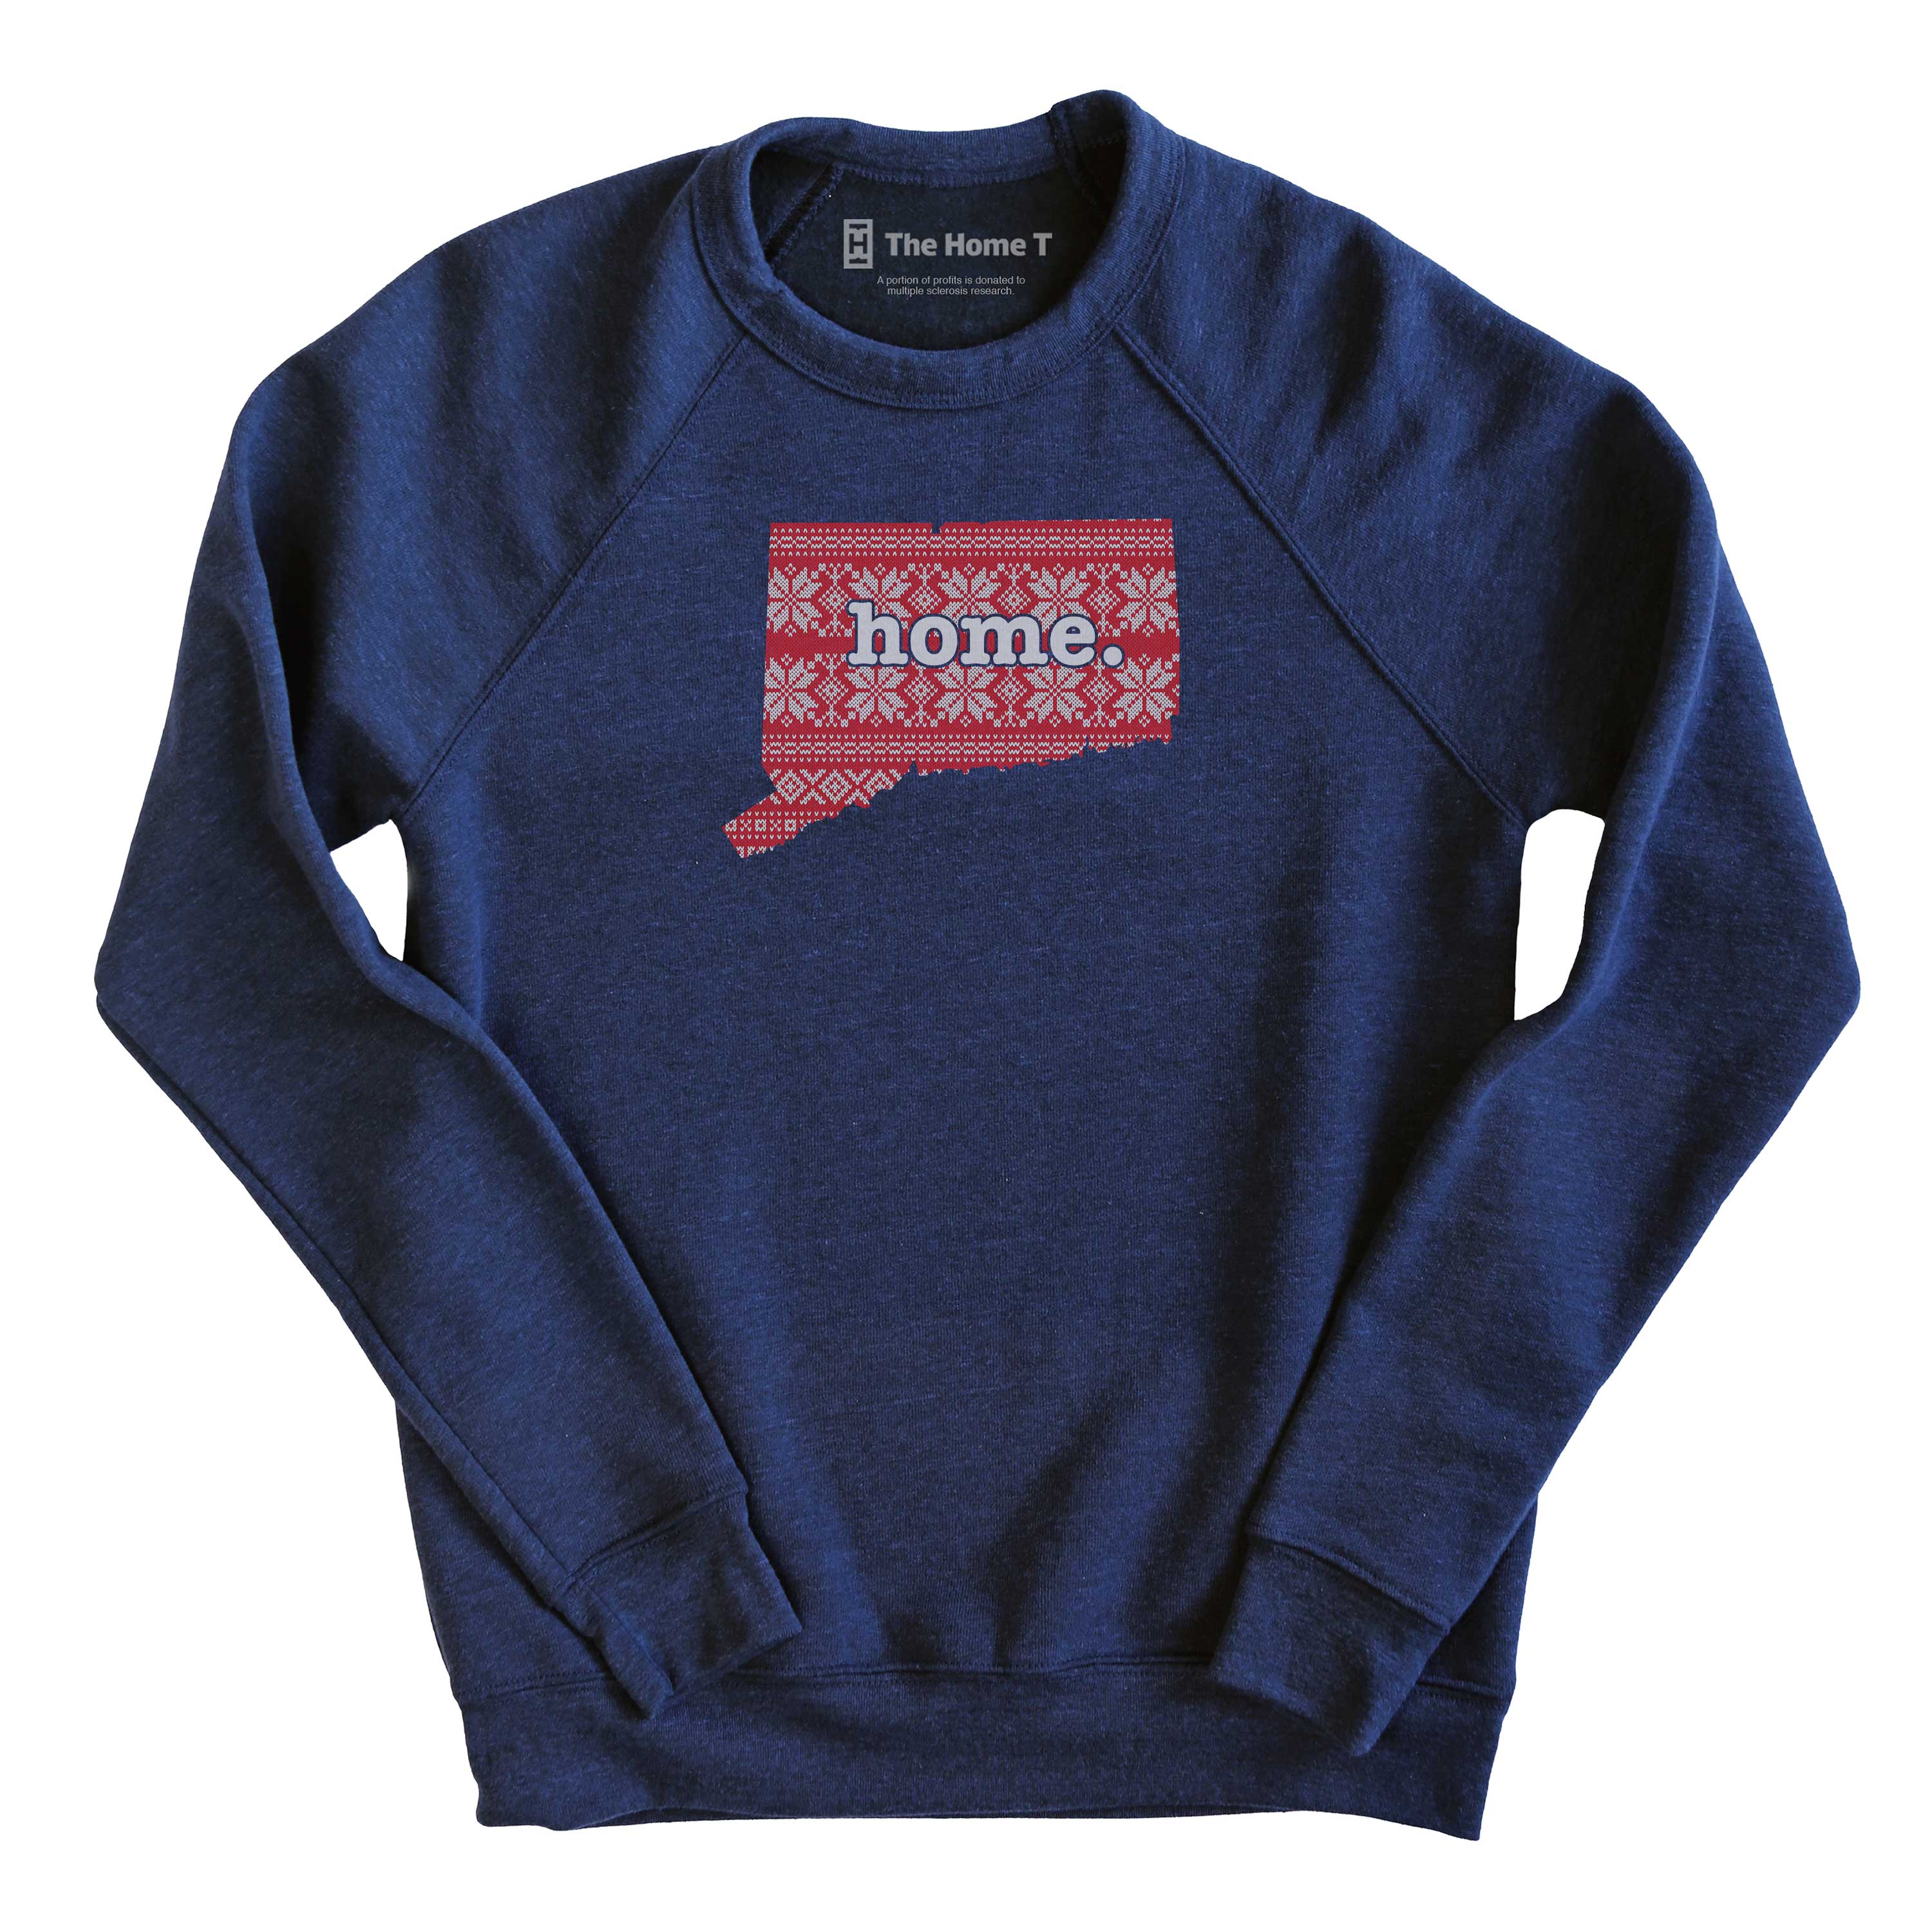 Connecticut Christmas Sweater Pattern Christmas Sweater The Home T XS Navy Sweatshirt